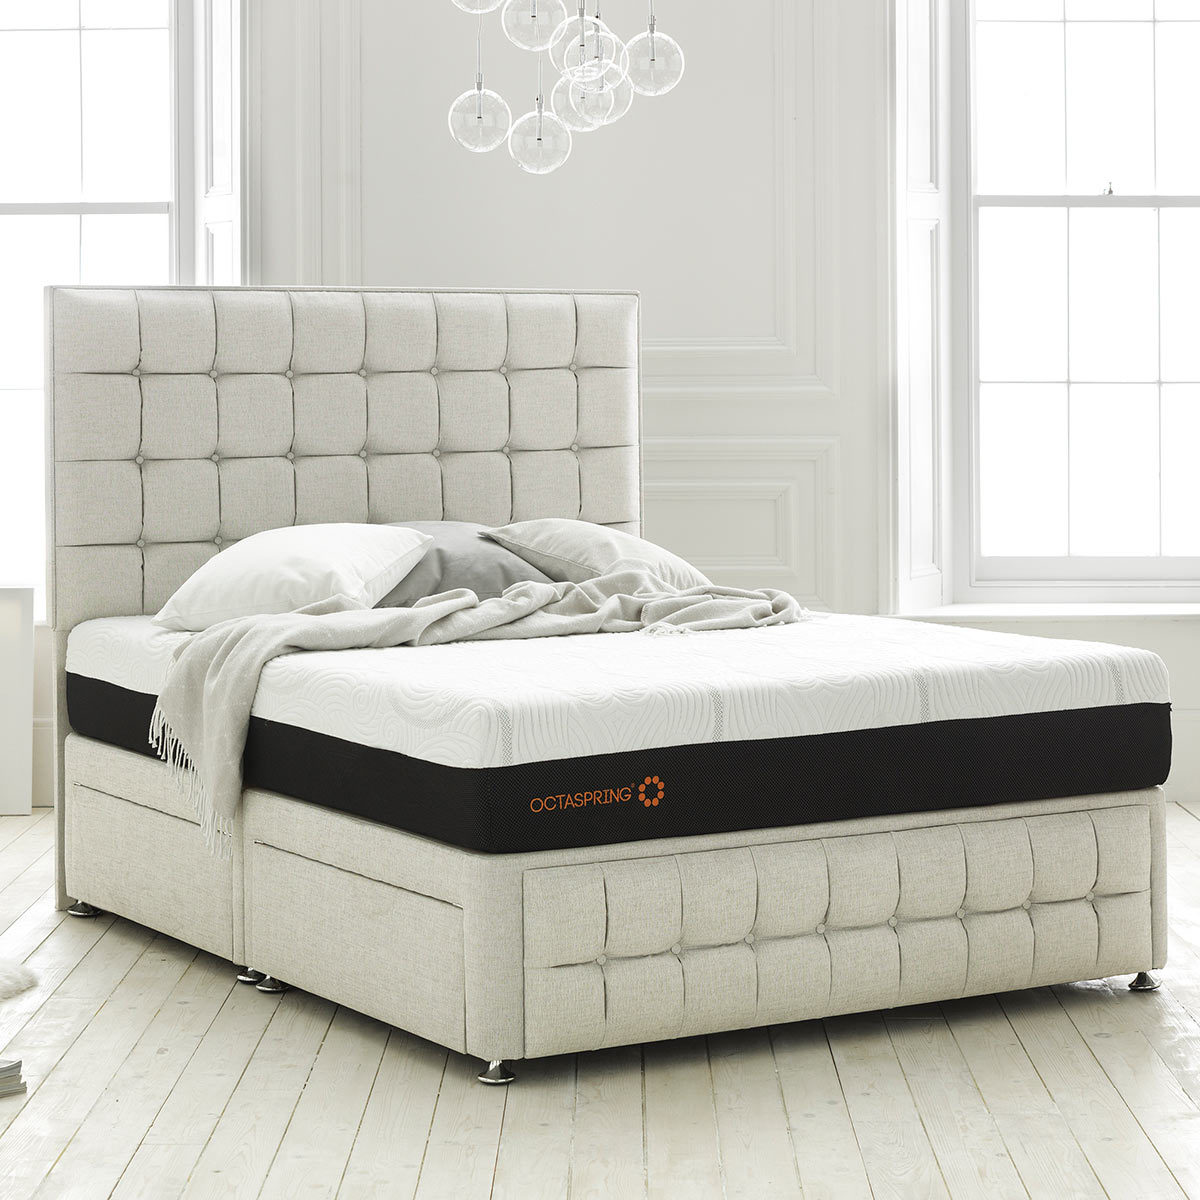 Octaspring Sirocco Mattress and Venice Divan with Headboard in White Sand, Double